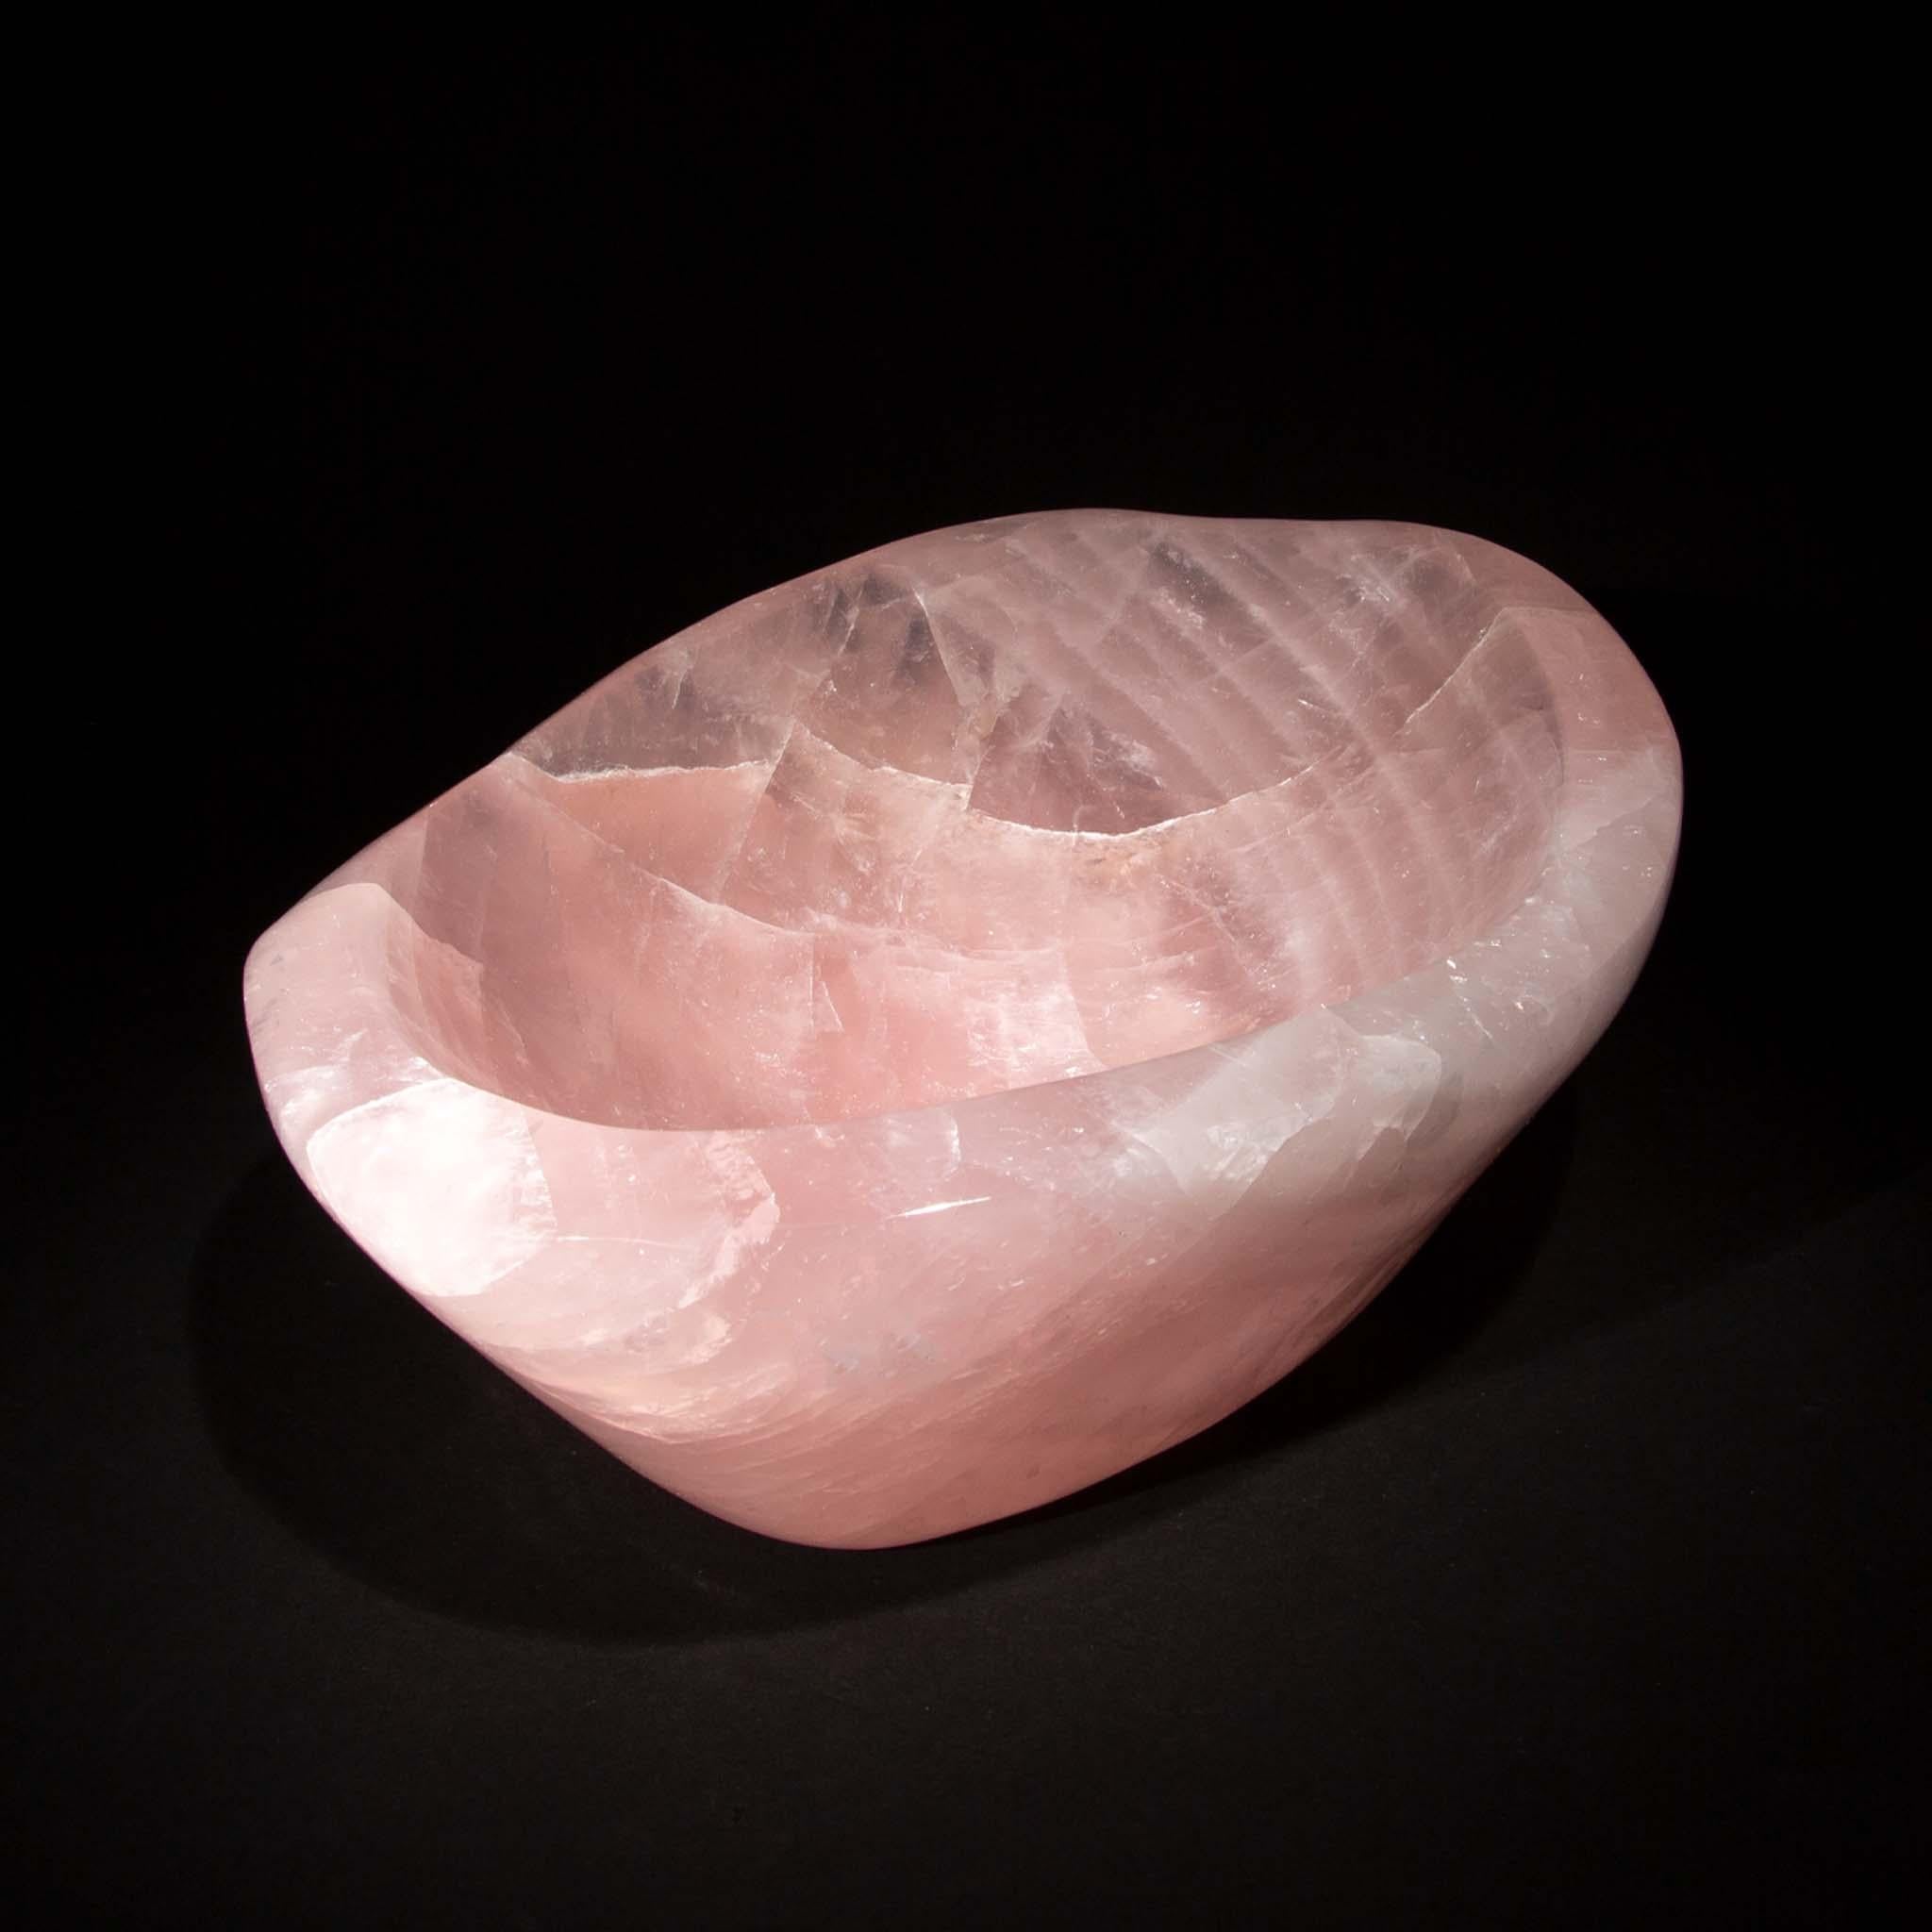 This Rose Quartz Bowl is a splendid showcase of soft elegance and refined artistry. With dimensions of 11.5 inches by 8.75 inches and a height of 4.25 inches, it is expertly carved from high-quality rose quartz, celebrated for its gentle pink tones